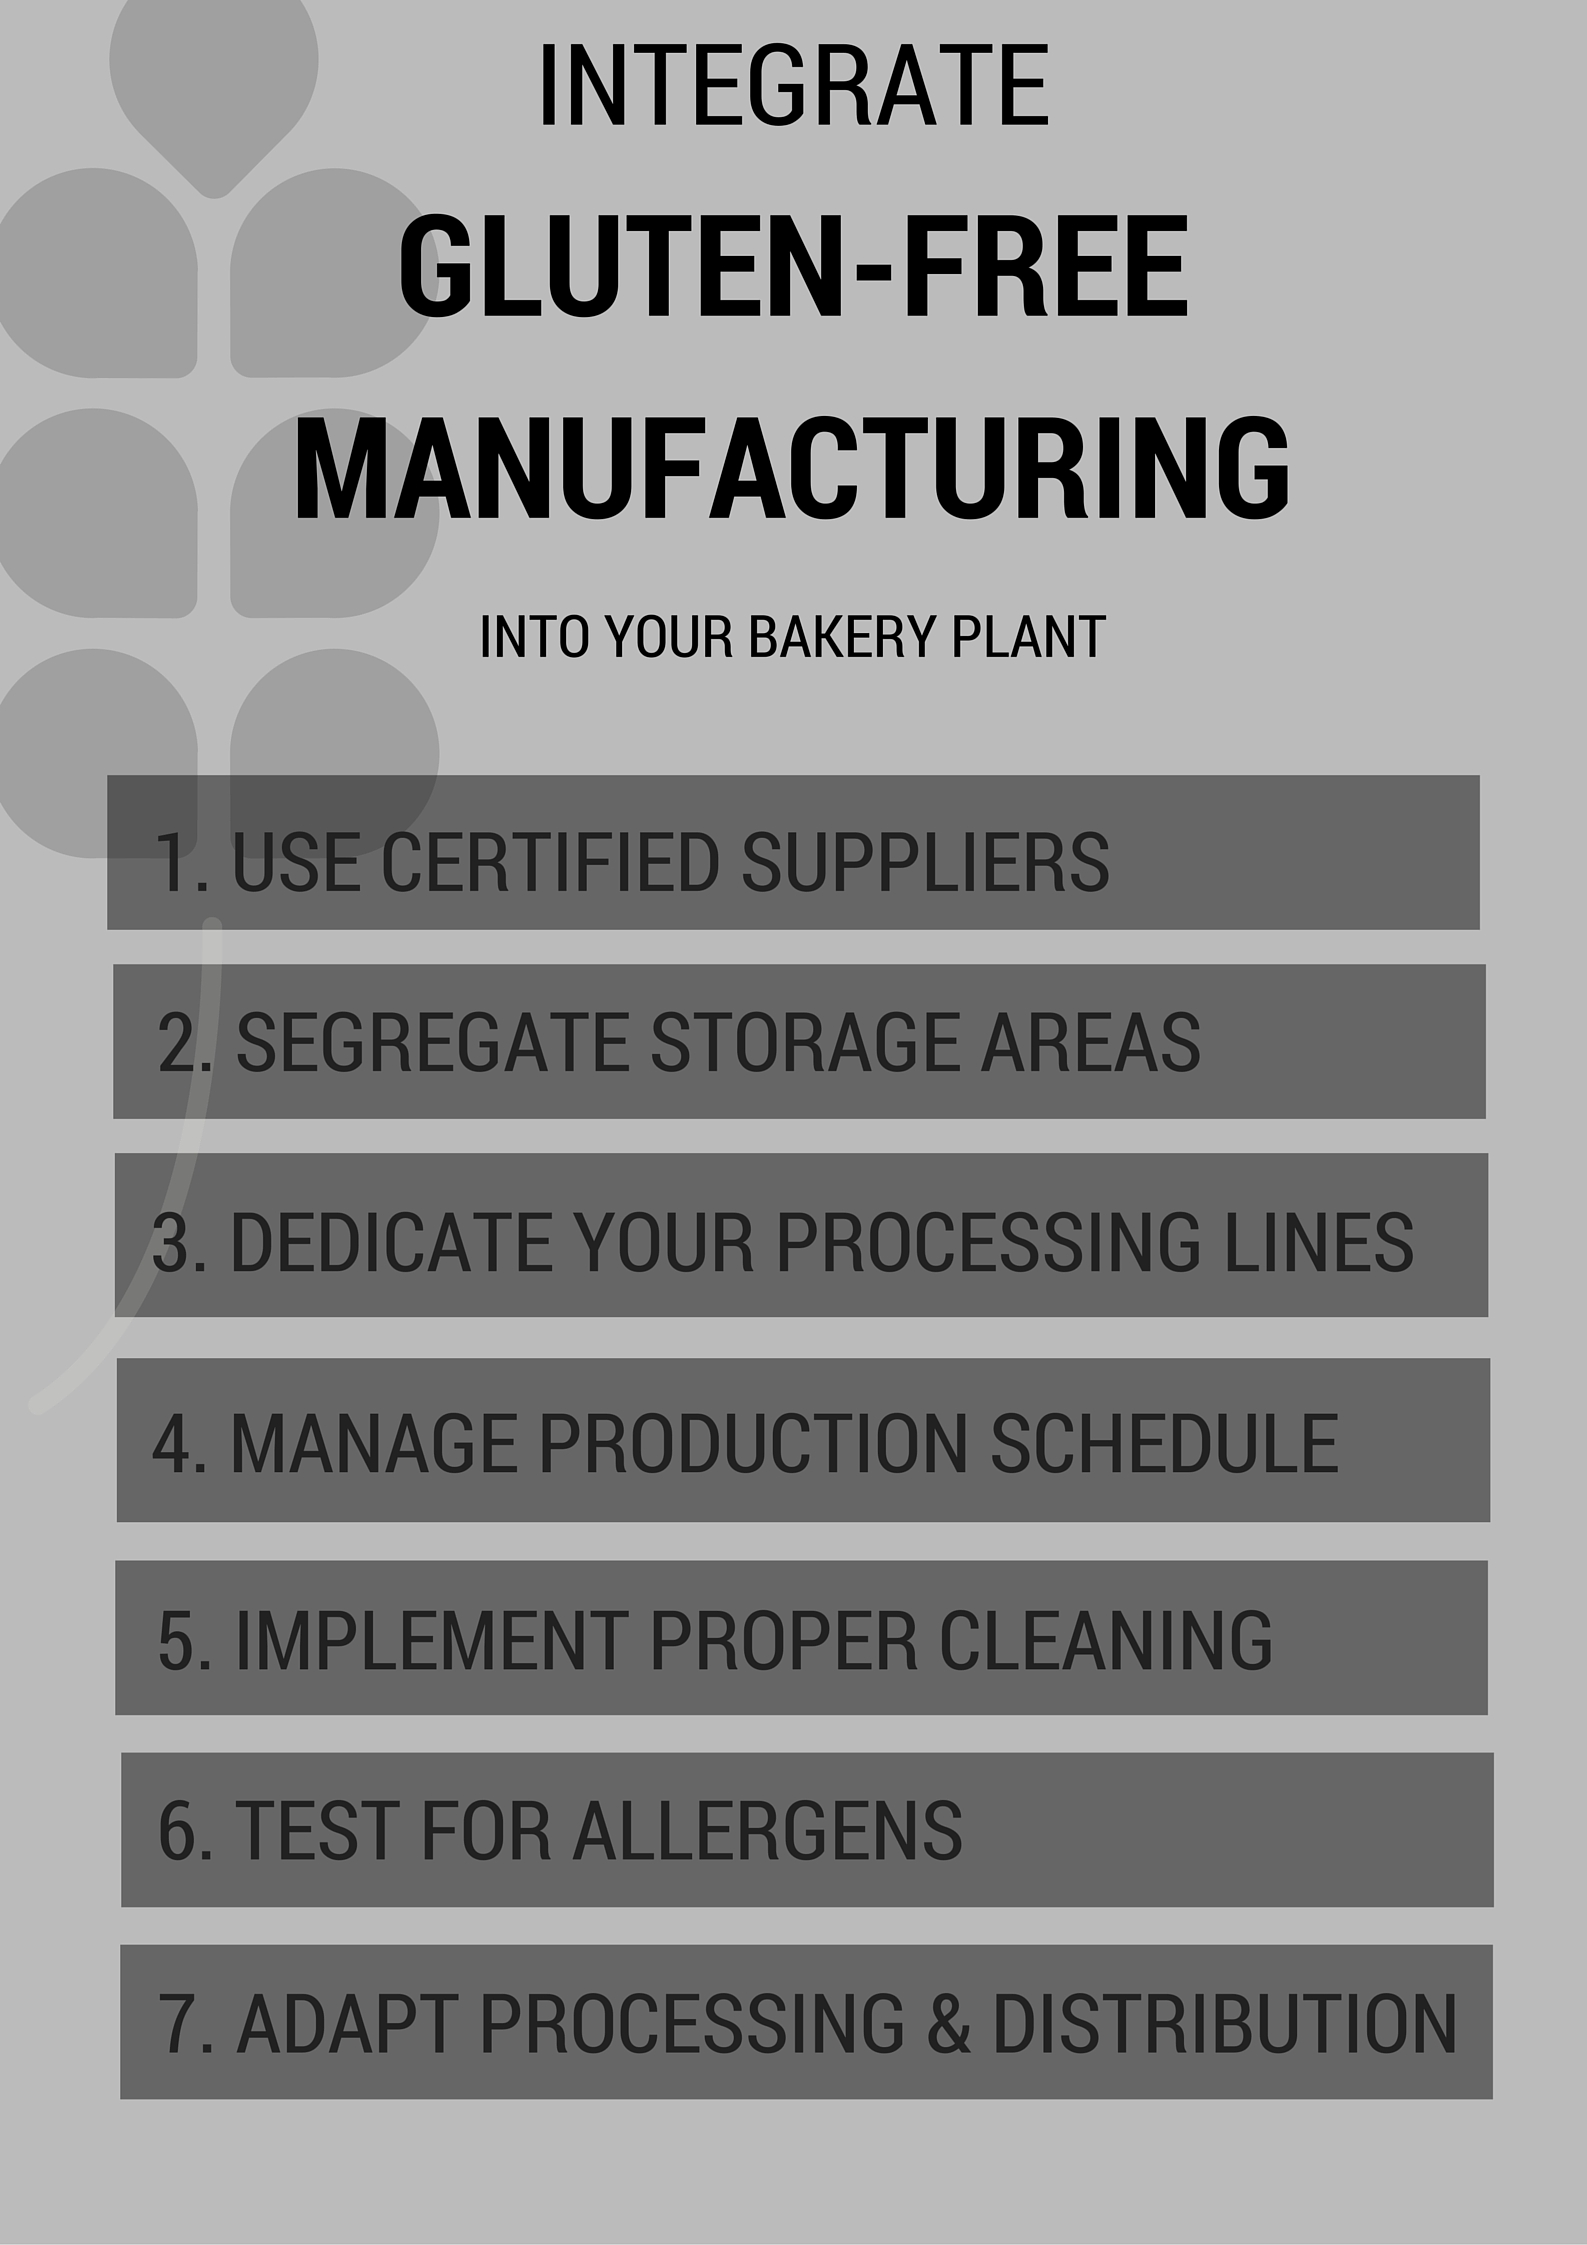 7 Ways to Integrate Gluten-free Manufacturing Into Your Bakery Plant